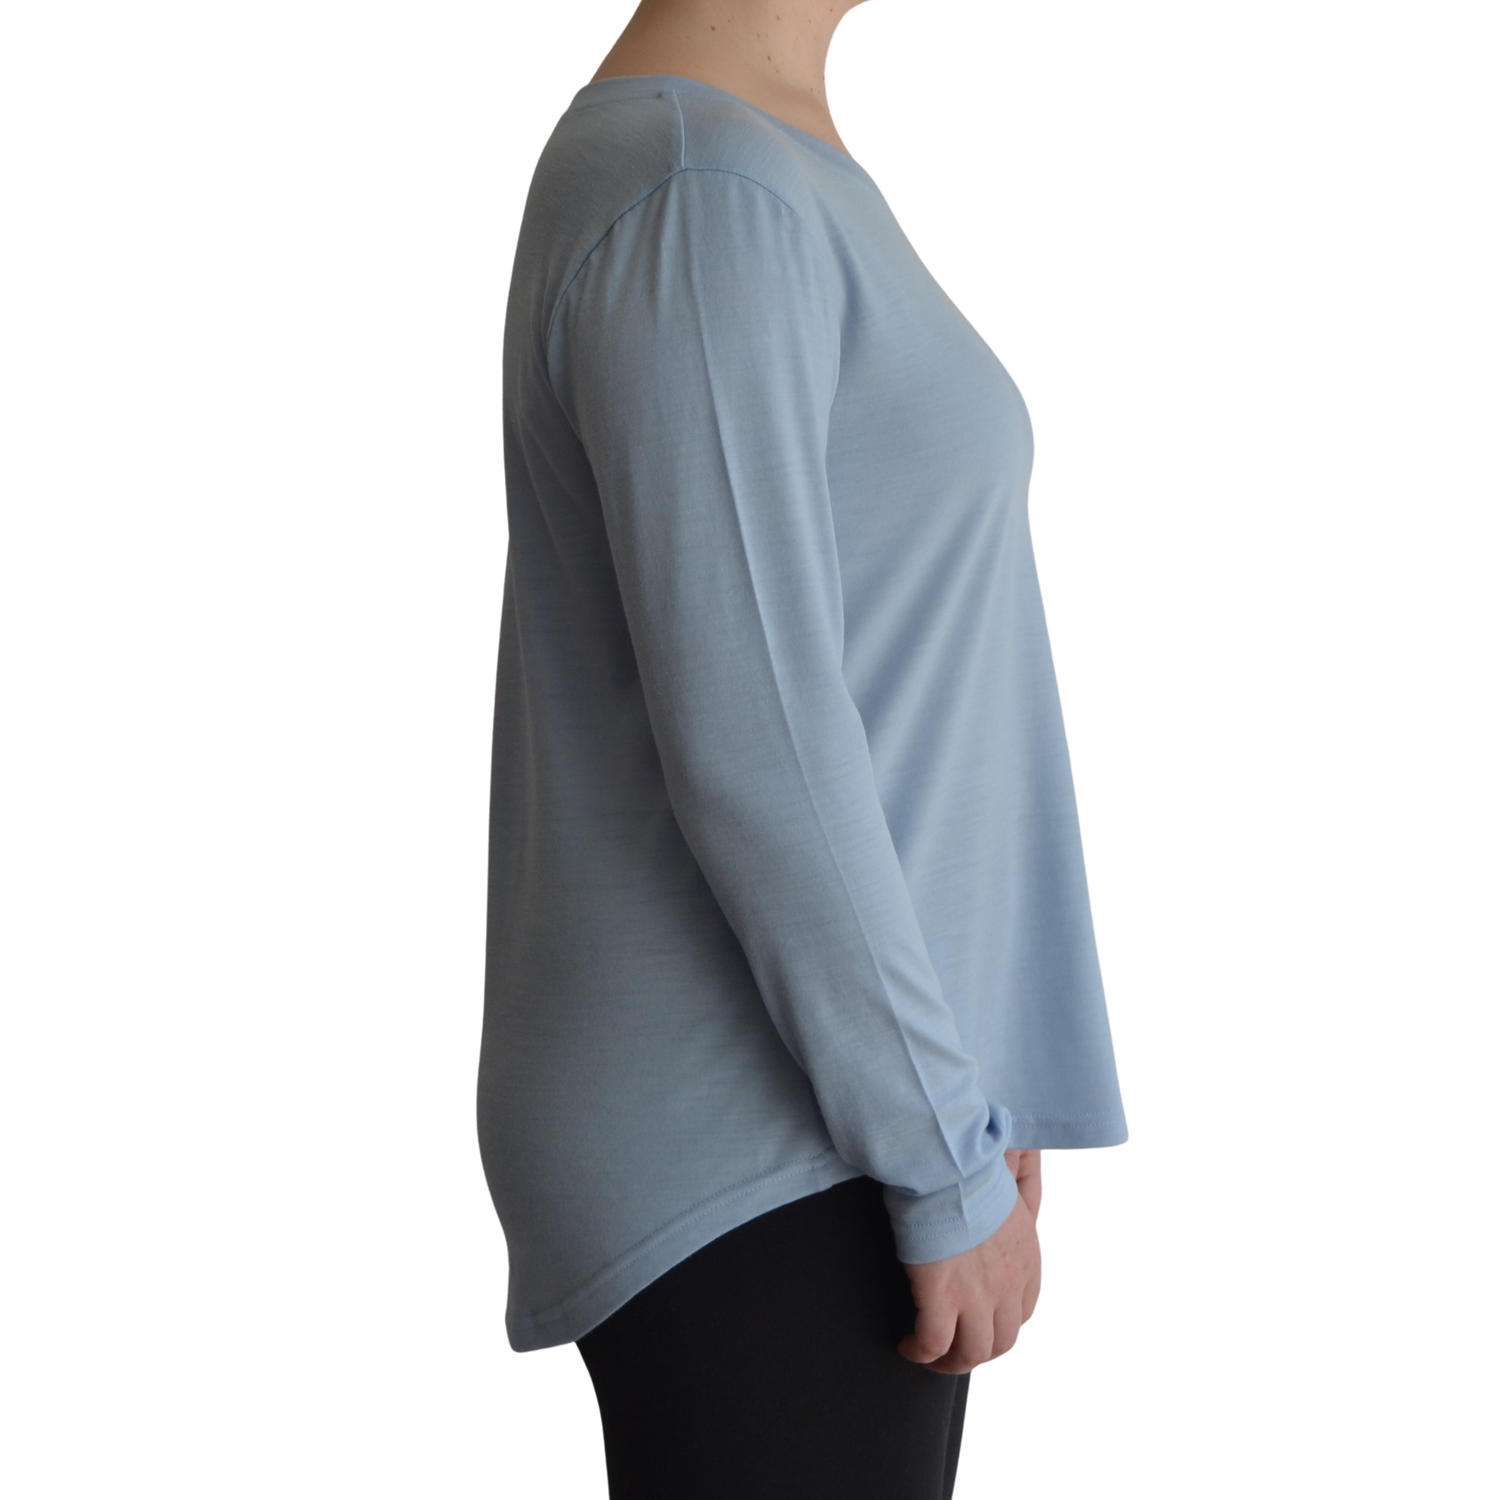 Links long sleeve merino top in ice blue colour, model is standing in profile showing the side view of the shirt with a scooped hemline that drops lower at the back. 